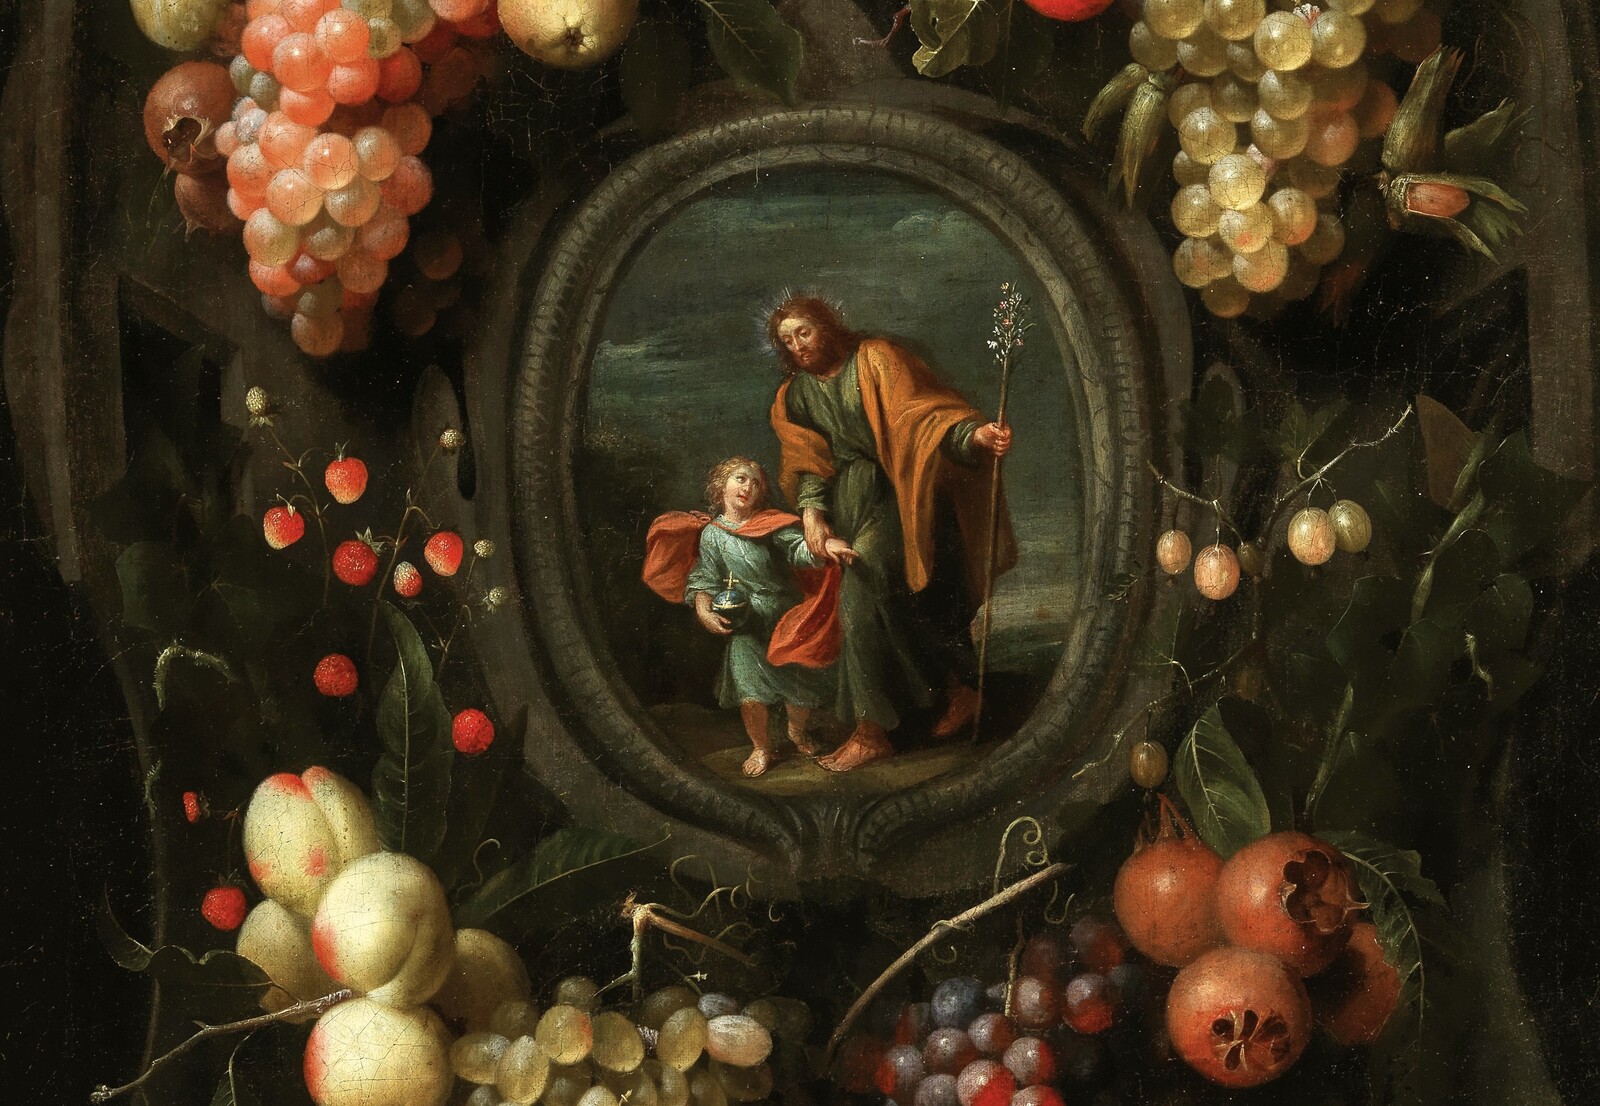 Garlands of fruit adorning a stone cartouche with Joseph and the Christ Child